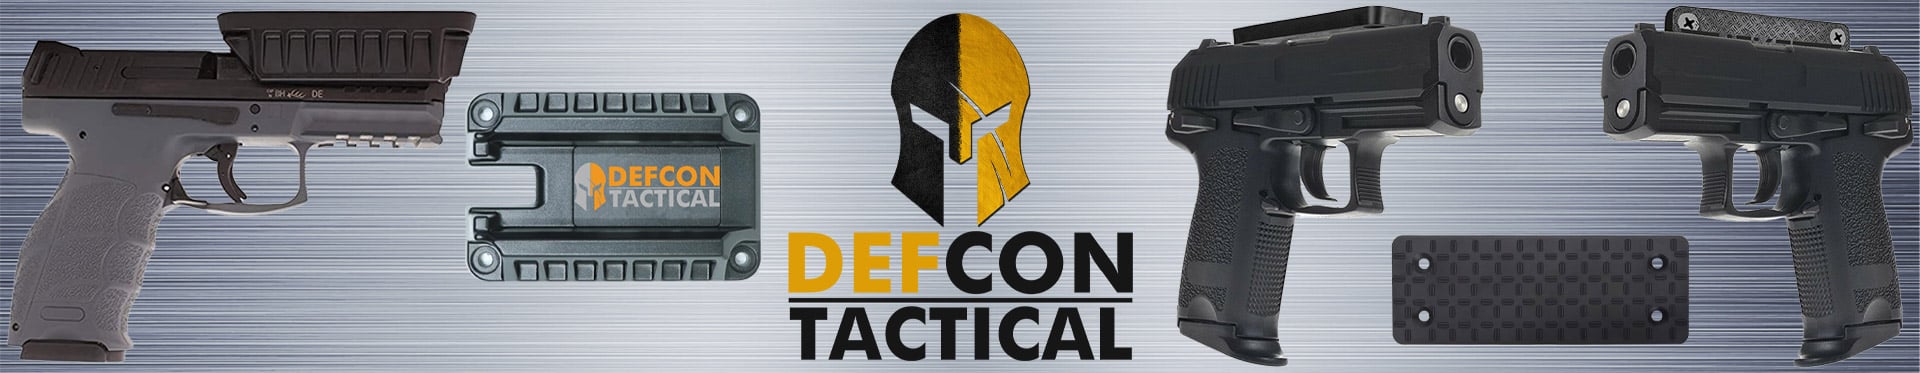 DEFCON Tactical QuickDraw Gun Magnets For Sale